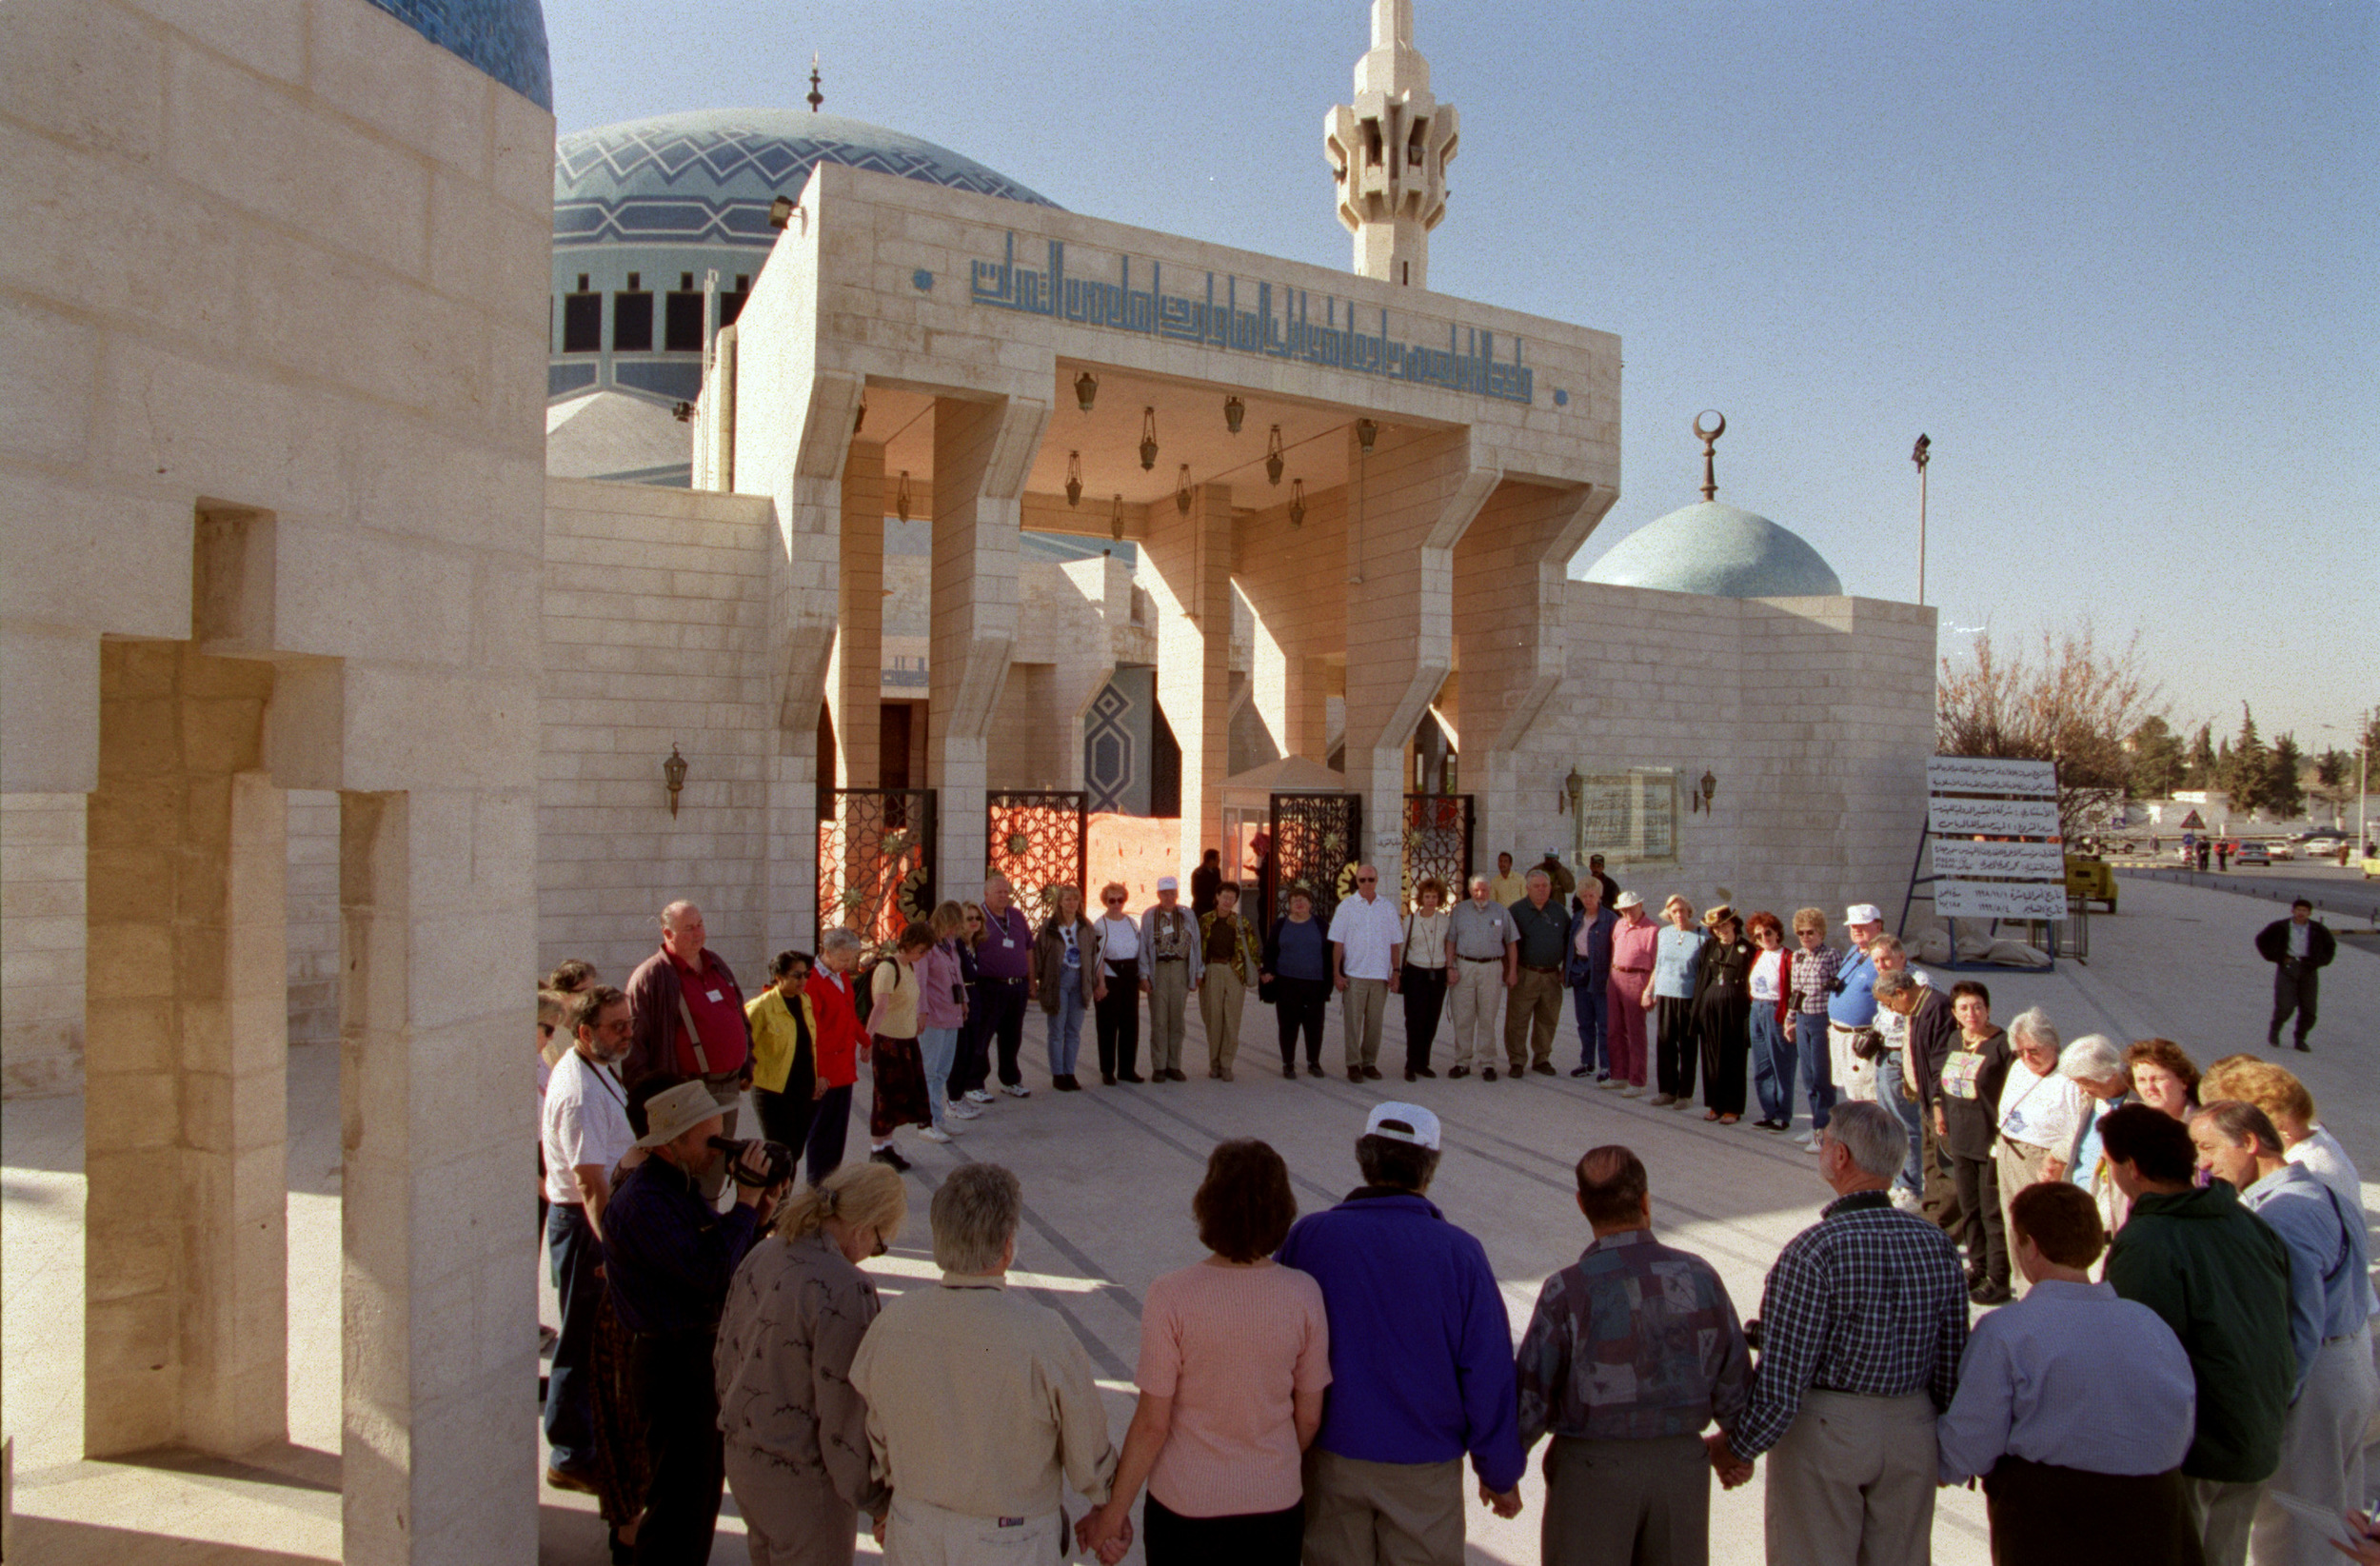  Orange County interfaith group prays in front of King Abdullah's Mosque in Amman, Jordan.&nbsp; Interfaith group traveled to various Christian, Jewish and Muslim sites during their pilgrimage.&nbsp;©Gail Fisher Los Angeles Times 